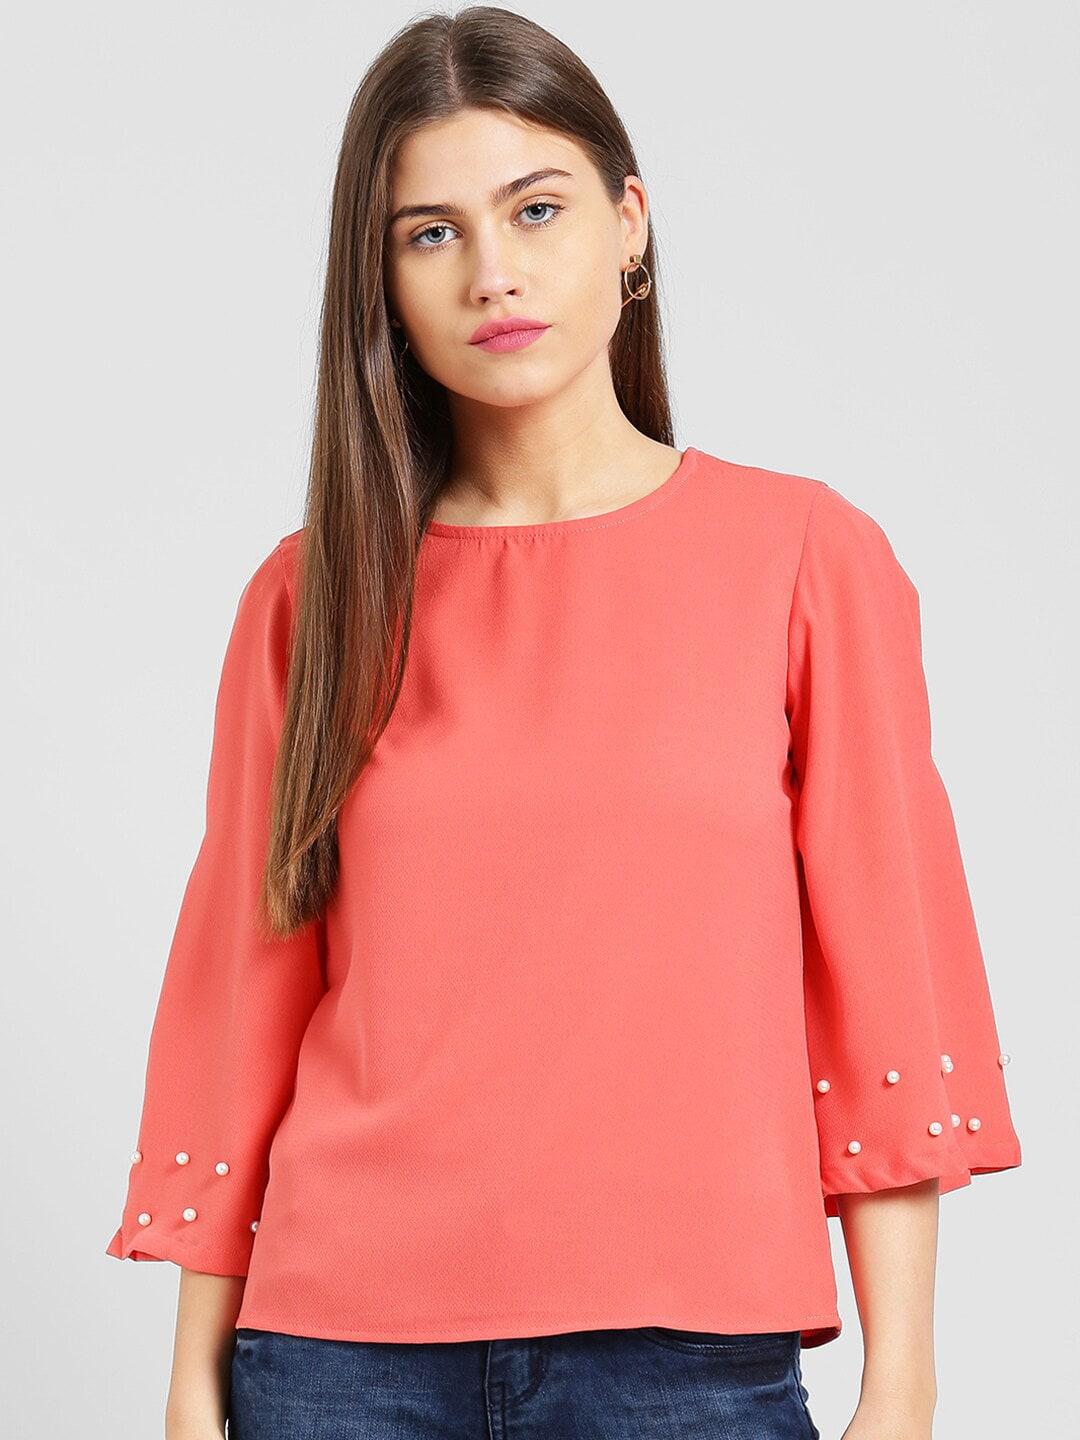 be-indi-women-coral-embellished-top